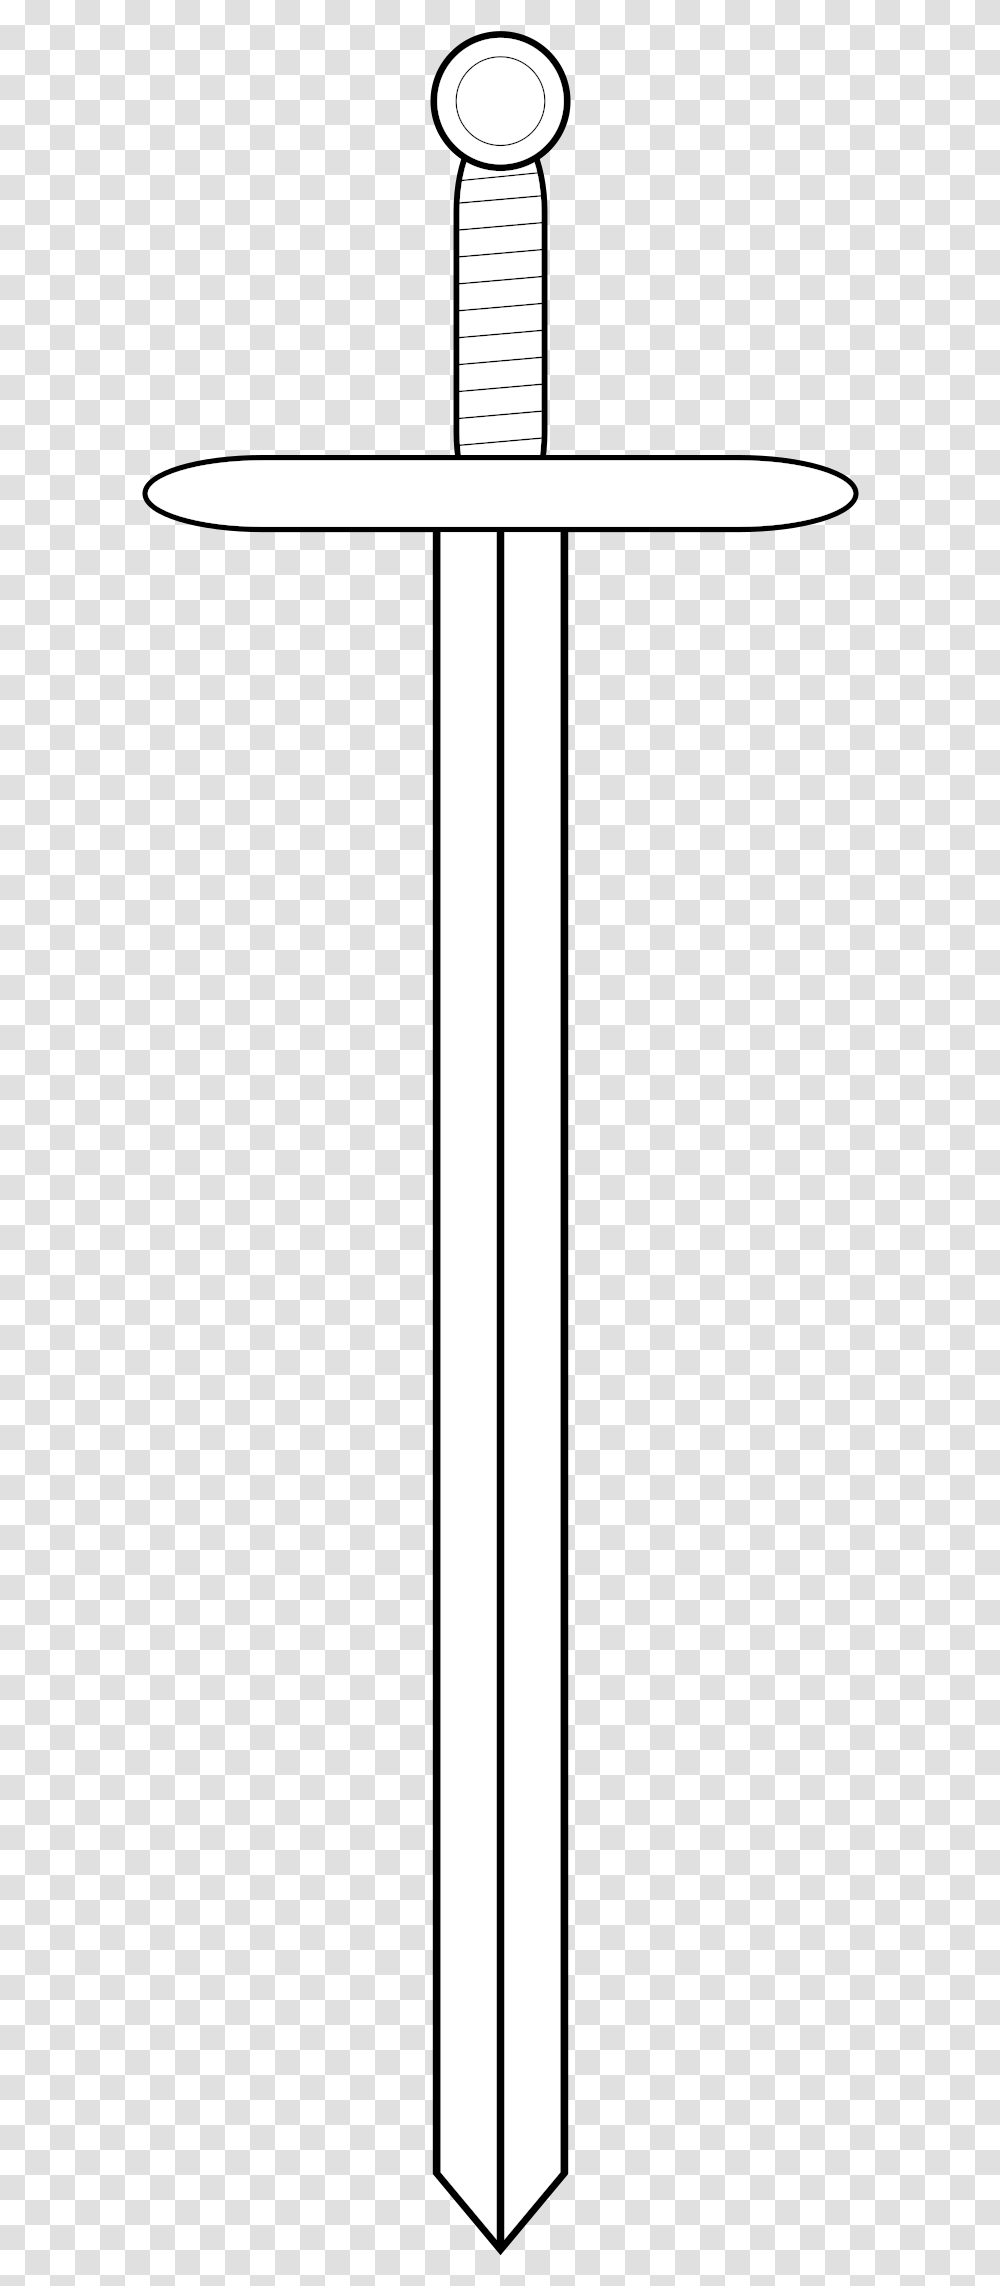 Sword Line Art Clip Arts Nfe 25, Blade, Weapon, Weaponry Transparent Png